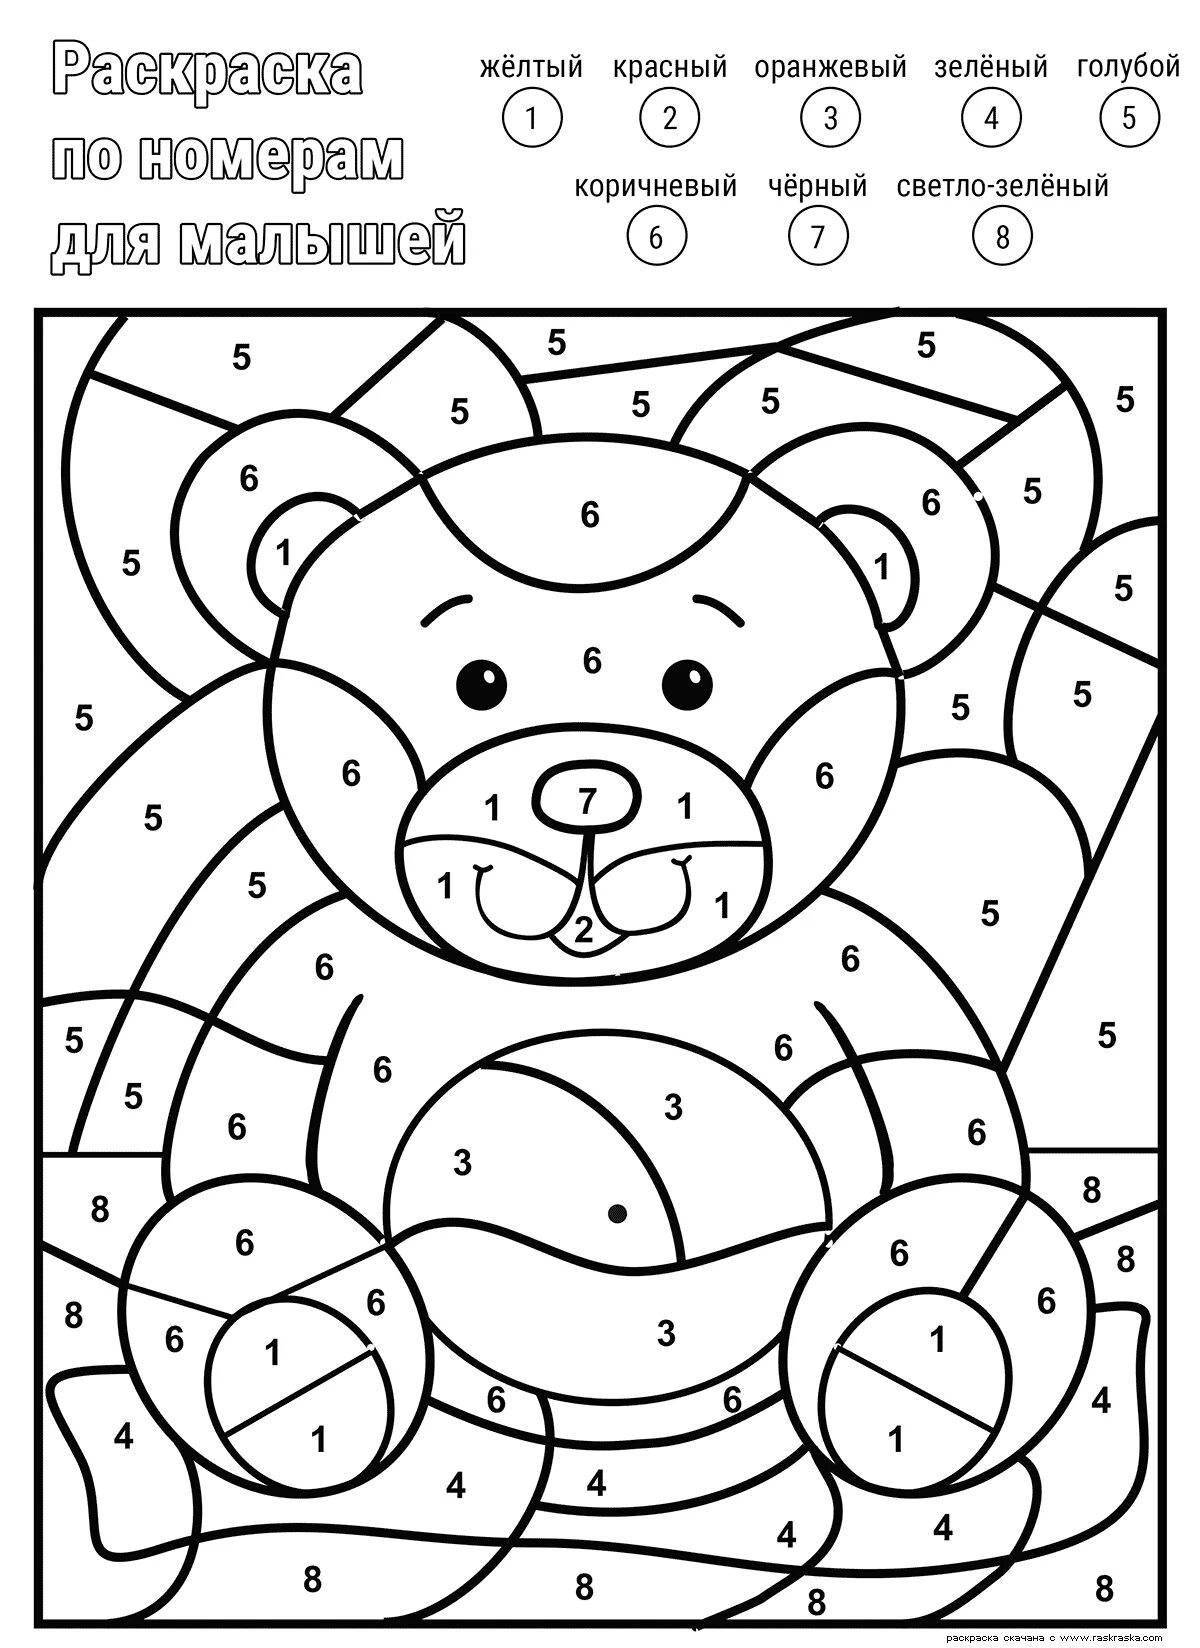 Fun coloring by numbers up to 10 for preschoolers